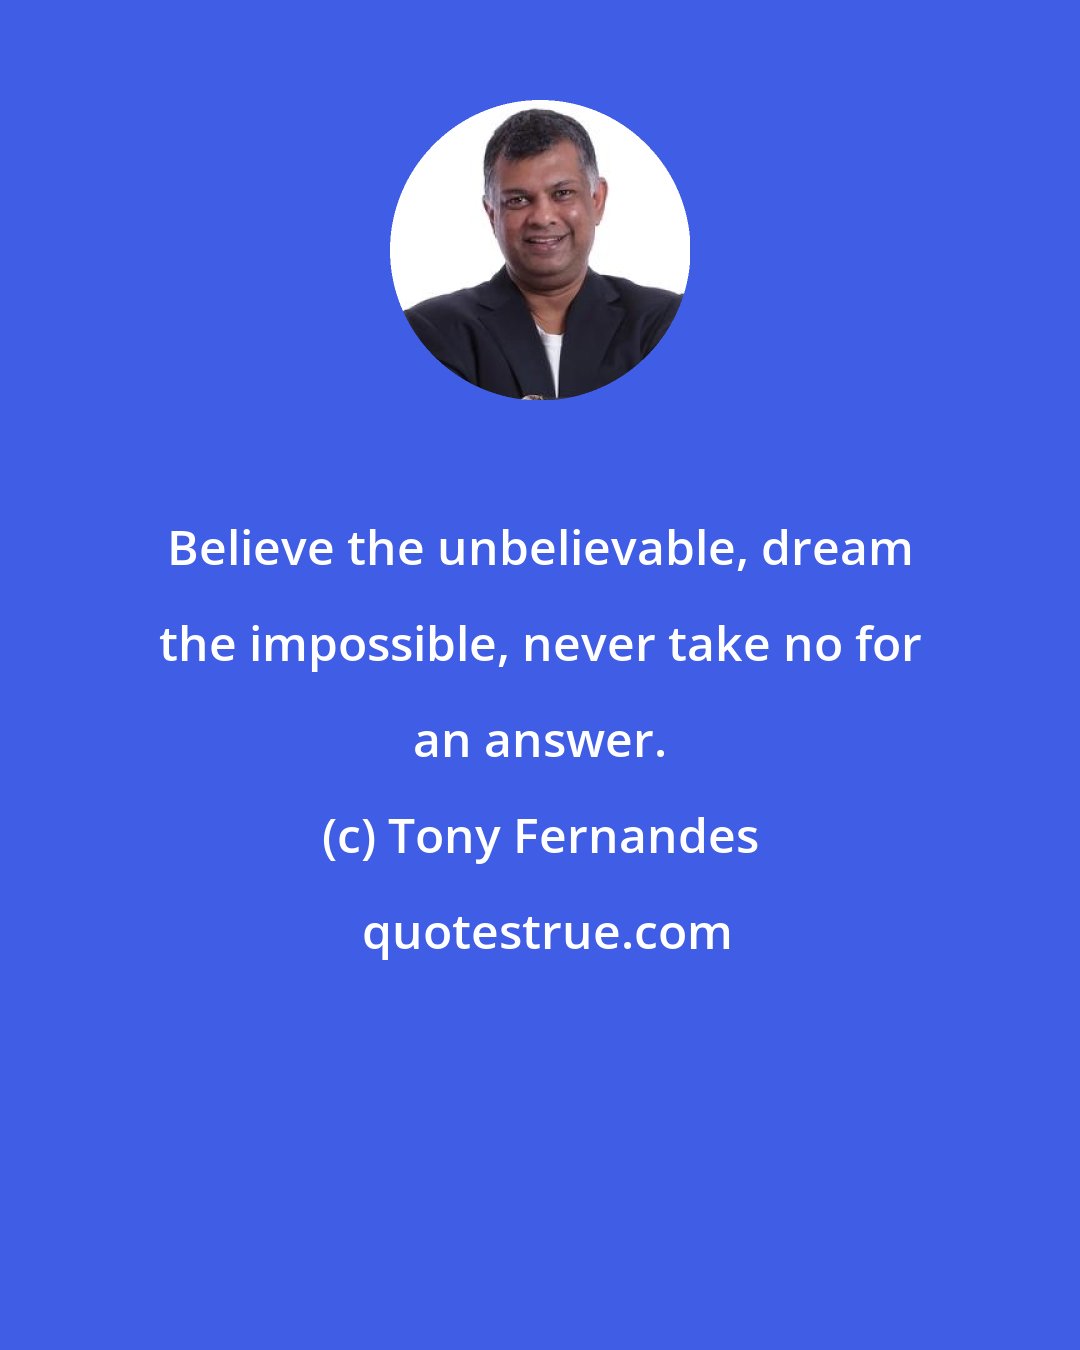 Tony Fernandes: Believe the unbelievable, dream the impossible, never take no for an answer.